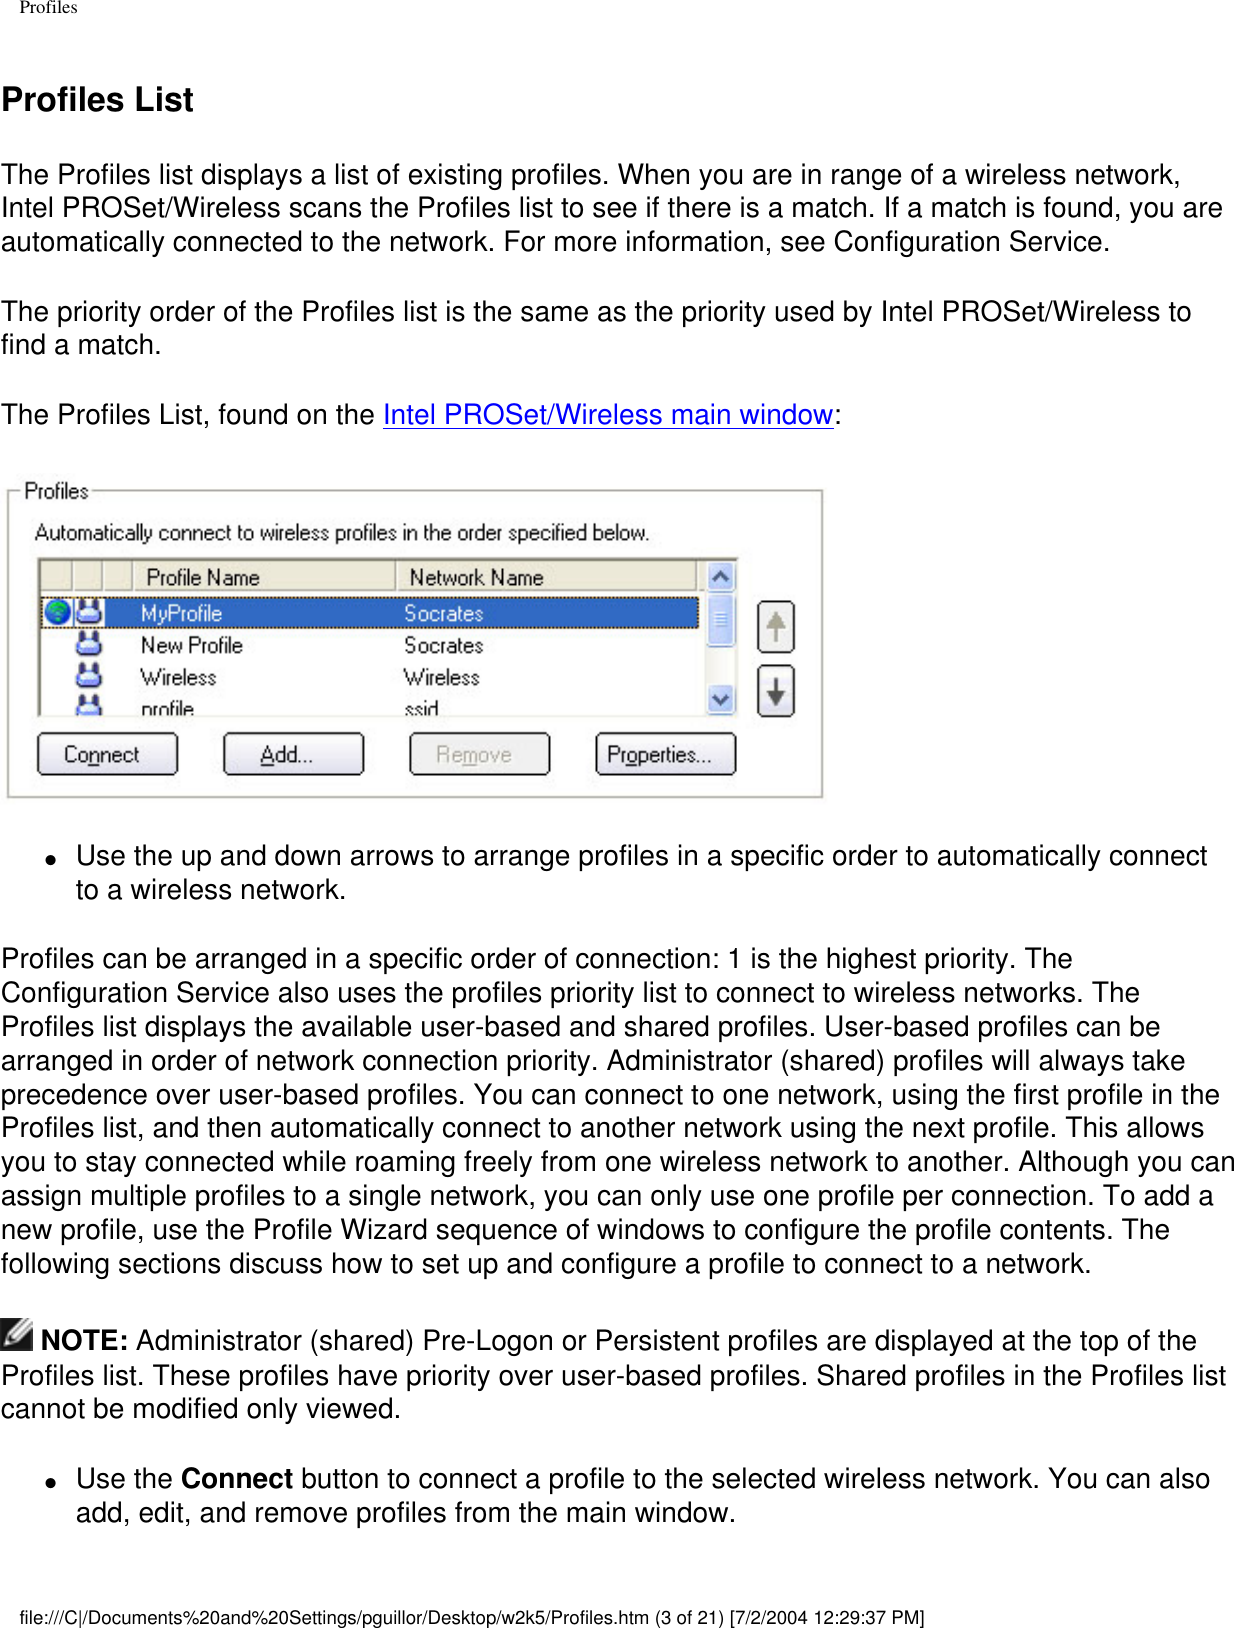 ProfilesProfiles ListThe Profiles list displays a list of existing profiles. When you are in range of a wireless network, Intel PROSet/Wireless scans the Profiles list to see if there is a match. If a match is found, you are automatically connected to the network. For more information, see Configuration Service. The priority order of the Profiles list is the same as the priority used by Intel PROSet/Wireless to find a match. The Profiles List, found on the Intel PROSet/Wireless main window:●     Use the up and down arrows to arrange profiles in a specific order to automatically connect to a wireless network. Profiles can be arranged in a specific order of connection: 1 is the highest priority. The Configuration Service also uses the profiles priority list to connect to wireless networks. The Profiles list displays the available user-based and shared profiles. User-based profiles can be arranged in order of network connection priority. Administrator (shared) profiles will always take precedence over user-based profiles. You can connect to one network, using the first profile in the Profiles list, and then automatically connect to another network using the next profile. This allows you to stay connected while roaming freely from one wireless network to another. Although you can assign multiple profiles to a single network, you can only use one profile per connection. To add a new profile, use the Profile Wizard sequence of windows to configure the profile contents. The following sections discuss how to set up and configure a profile to connect to a network. NOTE: Administrator (shared) Pre-Logon or Persistent profiles are displayed at the top of the Profiles list. These profiles have priority over user-based profiles. Shared profiles in the Profiles list cannot be modified only viewed.  ●     Use the Connect button to connect a profile to the selected wireless network. You can also add, edit, and remove profiles from the main window. file:///C|/Documents%20and%20Settings/pguillor/Desktop/w2k5/Profiles.htm (3 of 21) [7/2/2004 12:29:37 PM]